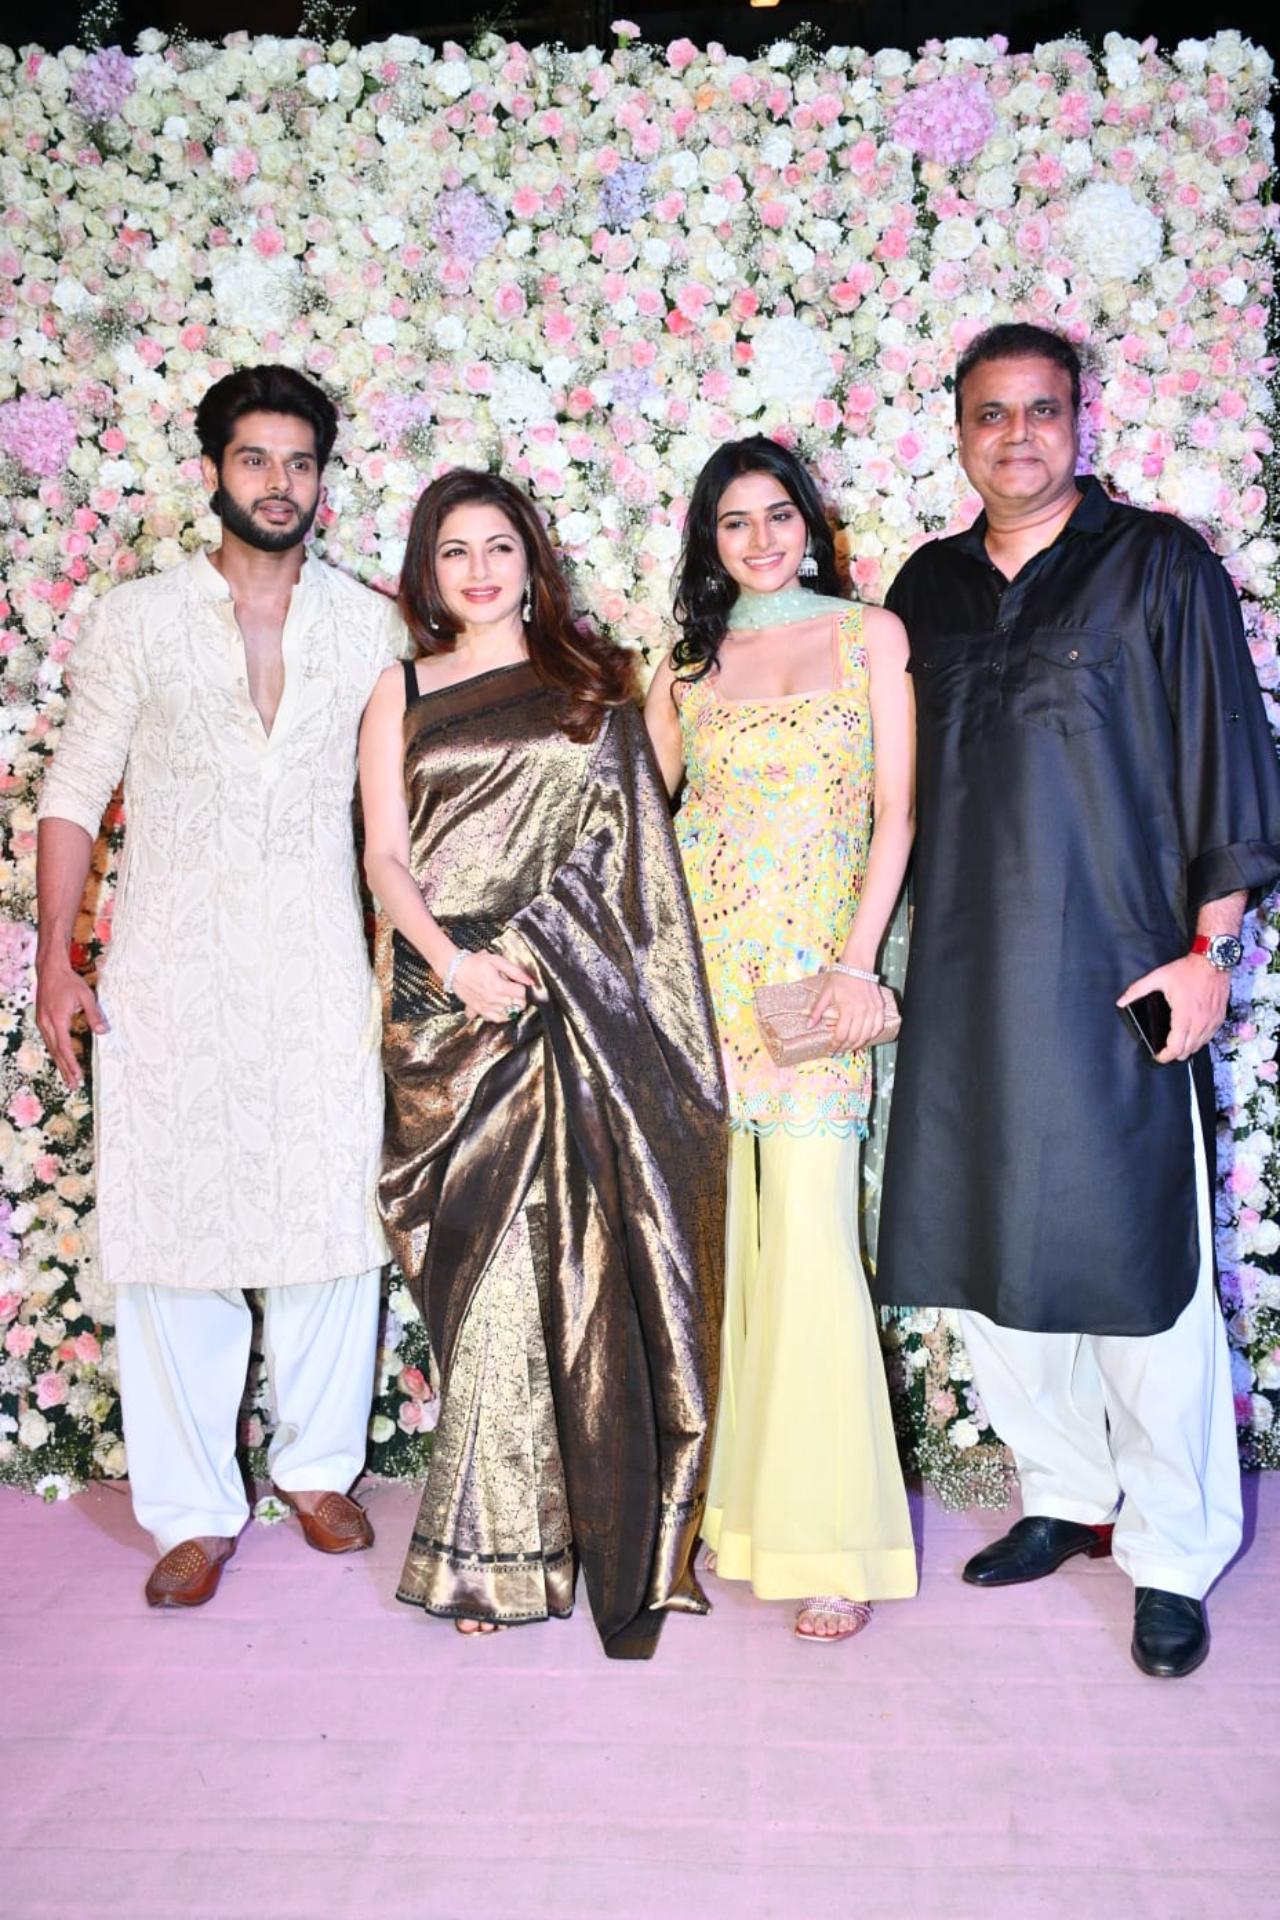 Actor Bhagyashree arrived along with her family for the party. She recently made a cameo in Salman Khan-starrer 'Kisi Ka Bhai Kisi Ki Jaan'